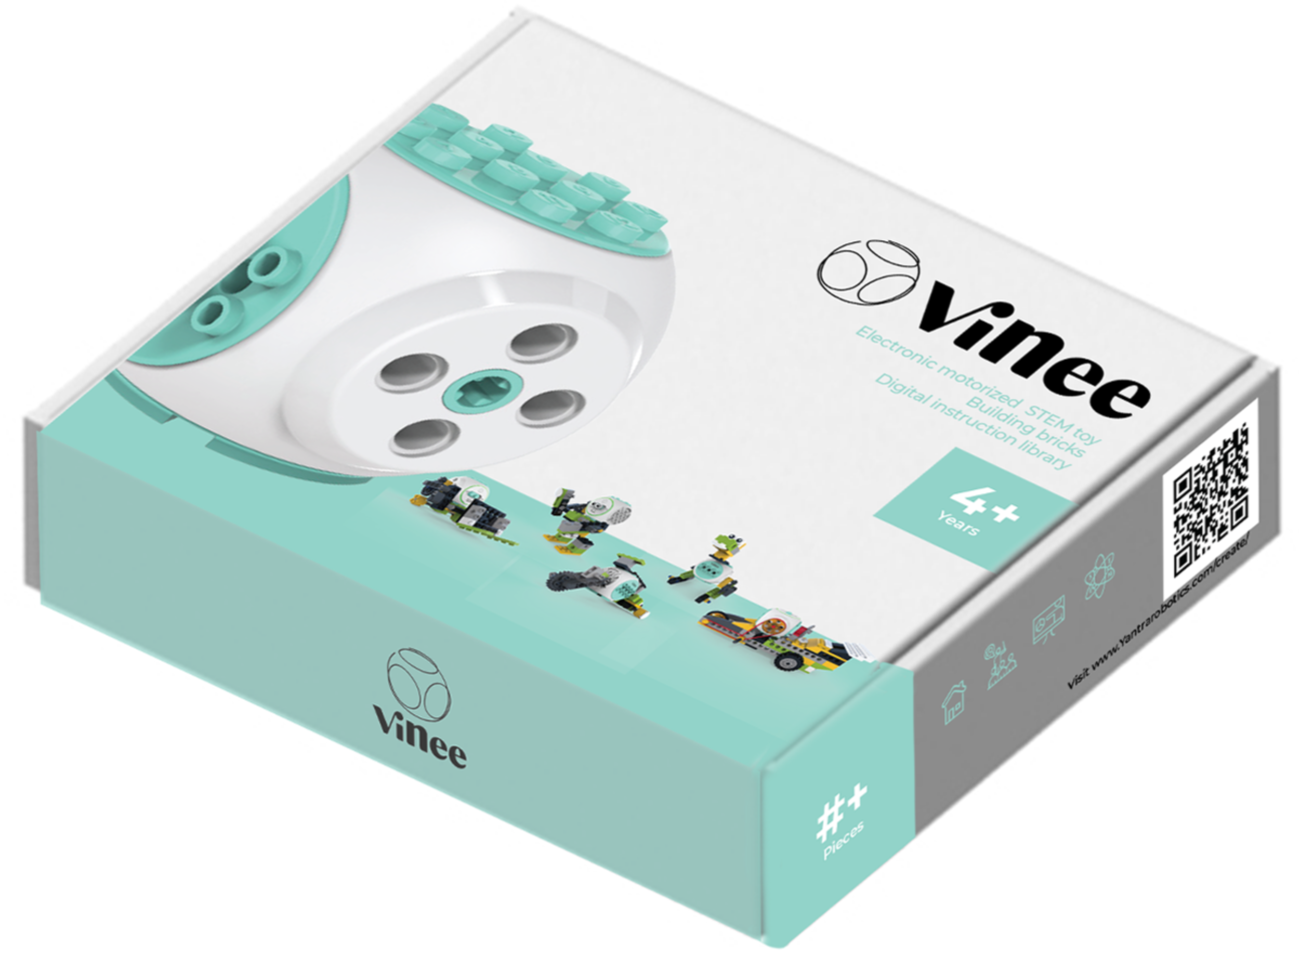 ViNee Master Kit. Includes 156 LEGO bricks, charging cable, instructions